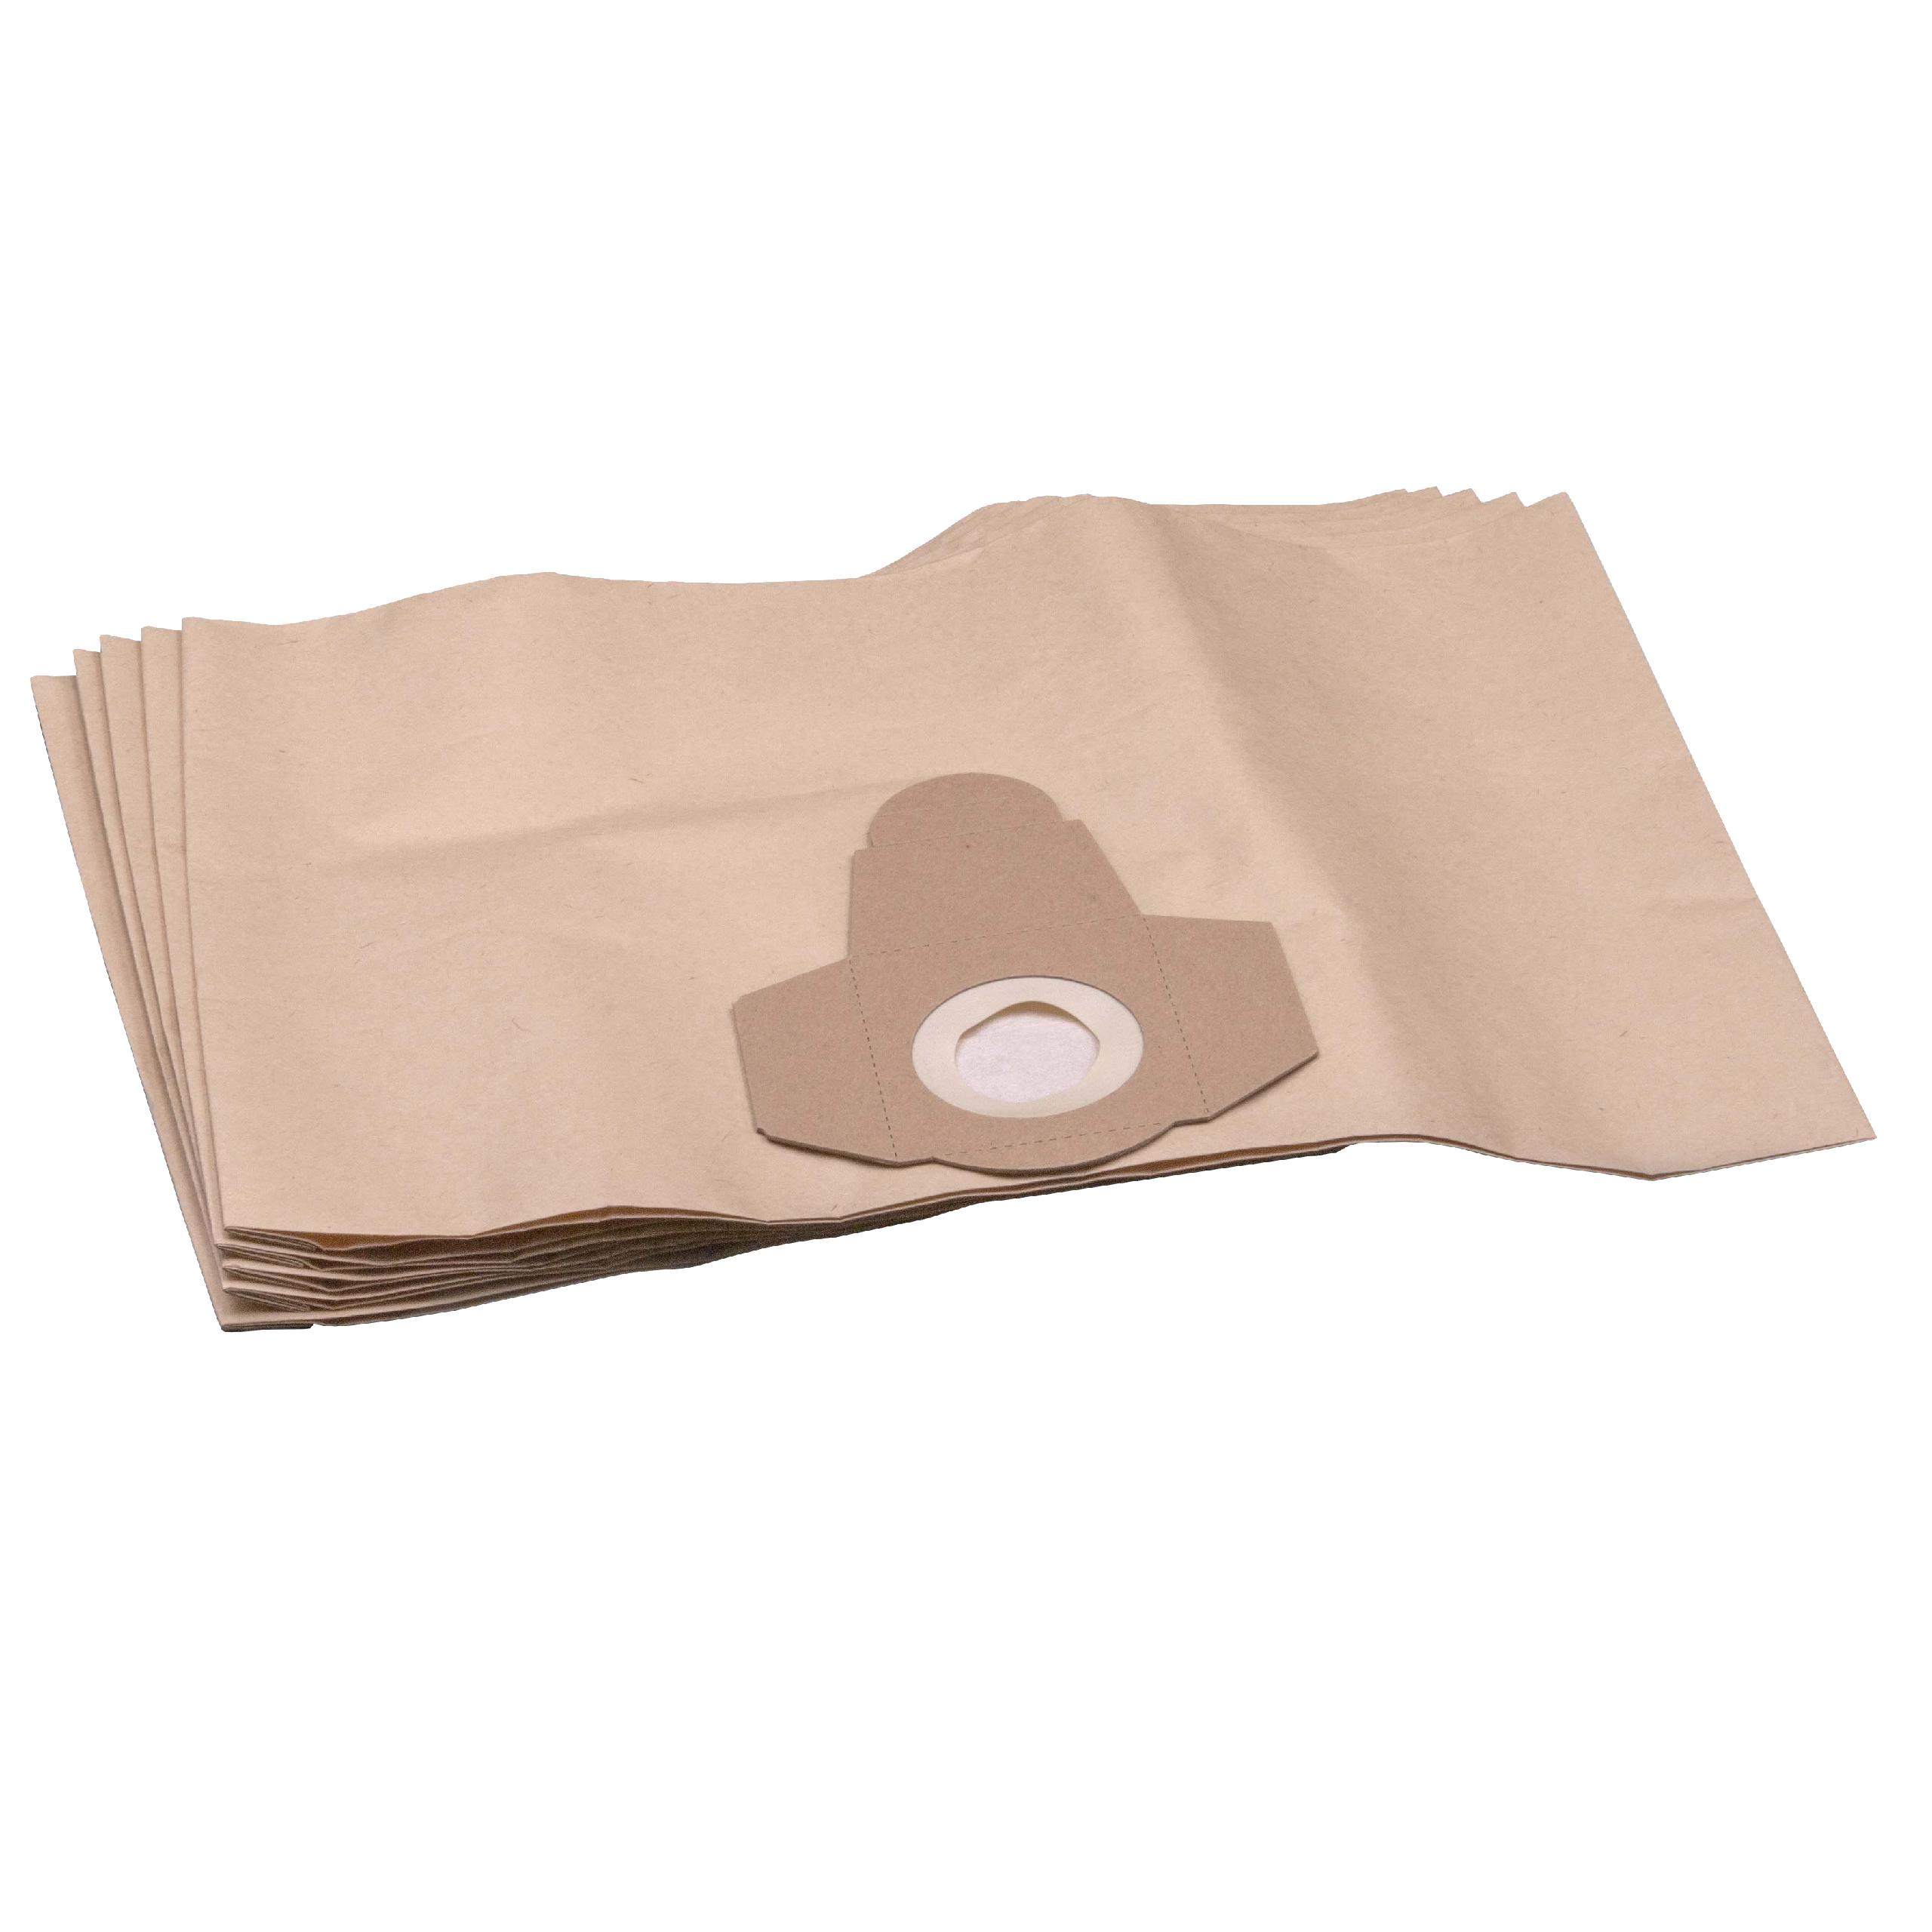 5x Vacuum Cleaner Bag suitable for 1250 Einhell Inox 1250 - paper